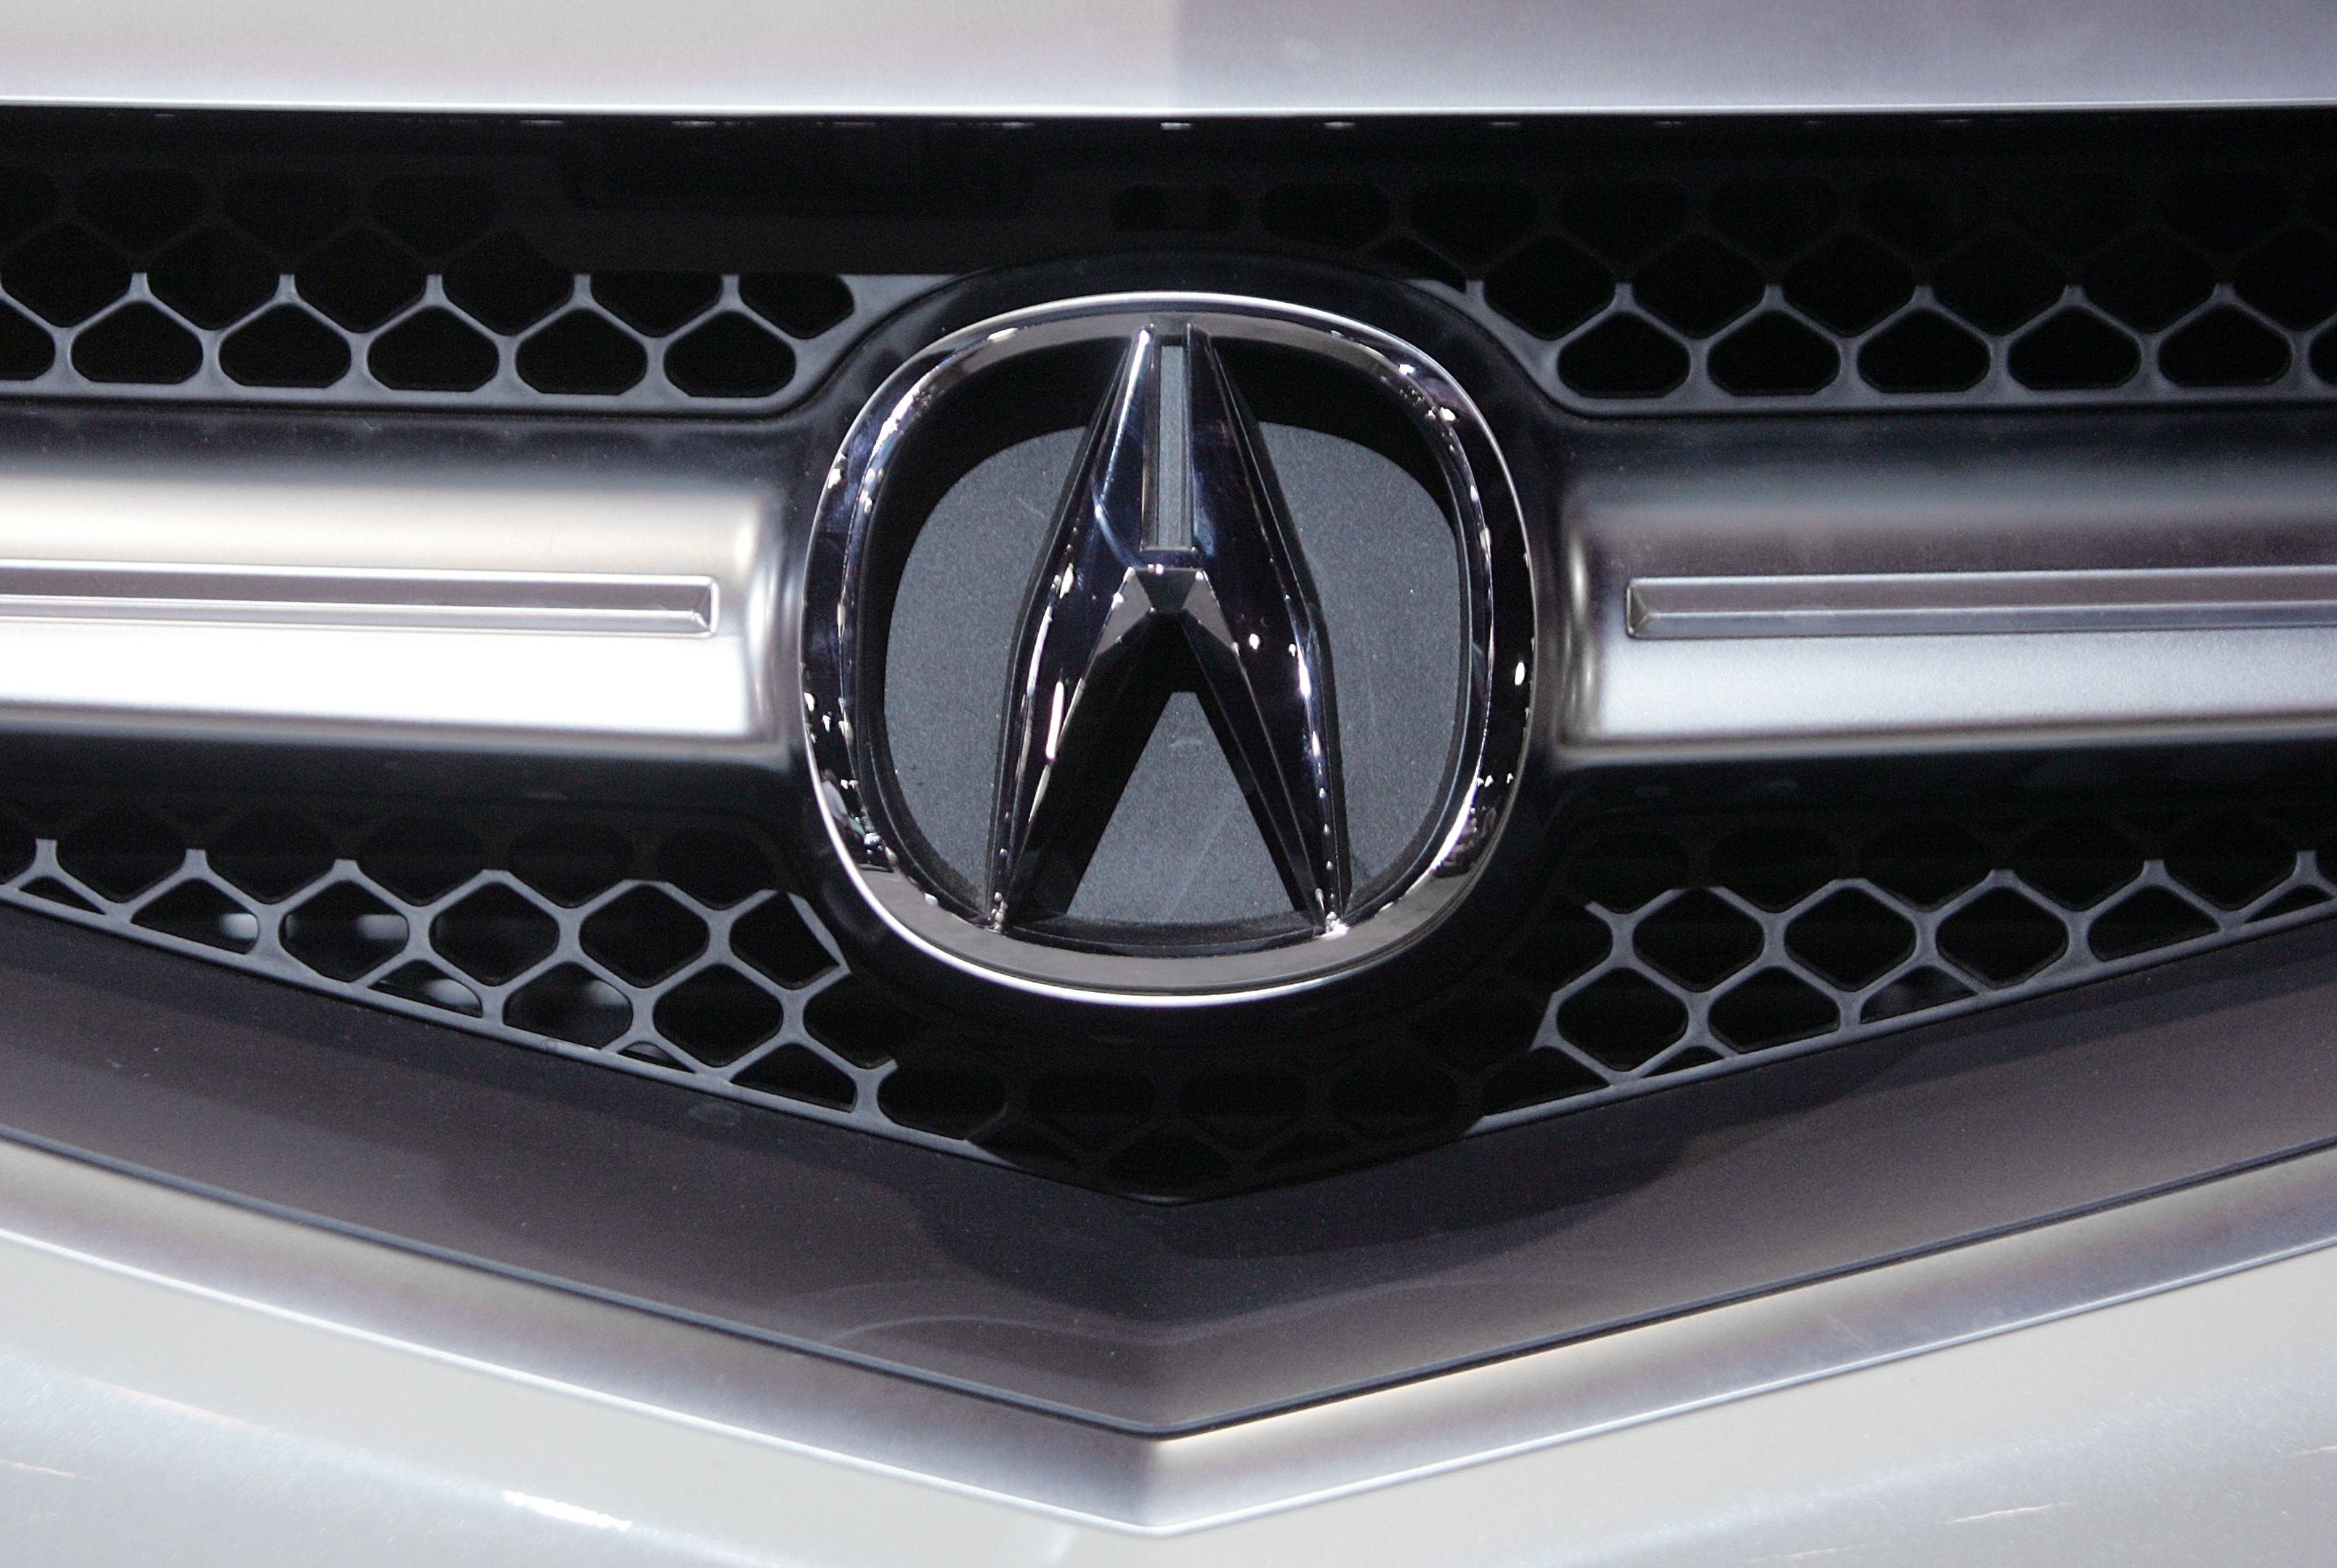 Mercedes Emblem for your key FOB. Two emblems included.